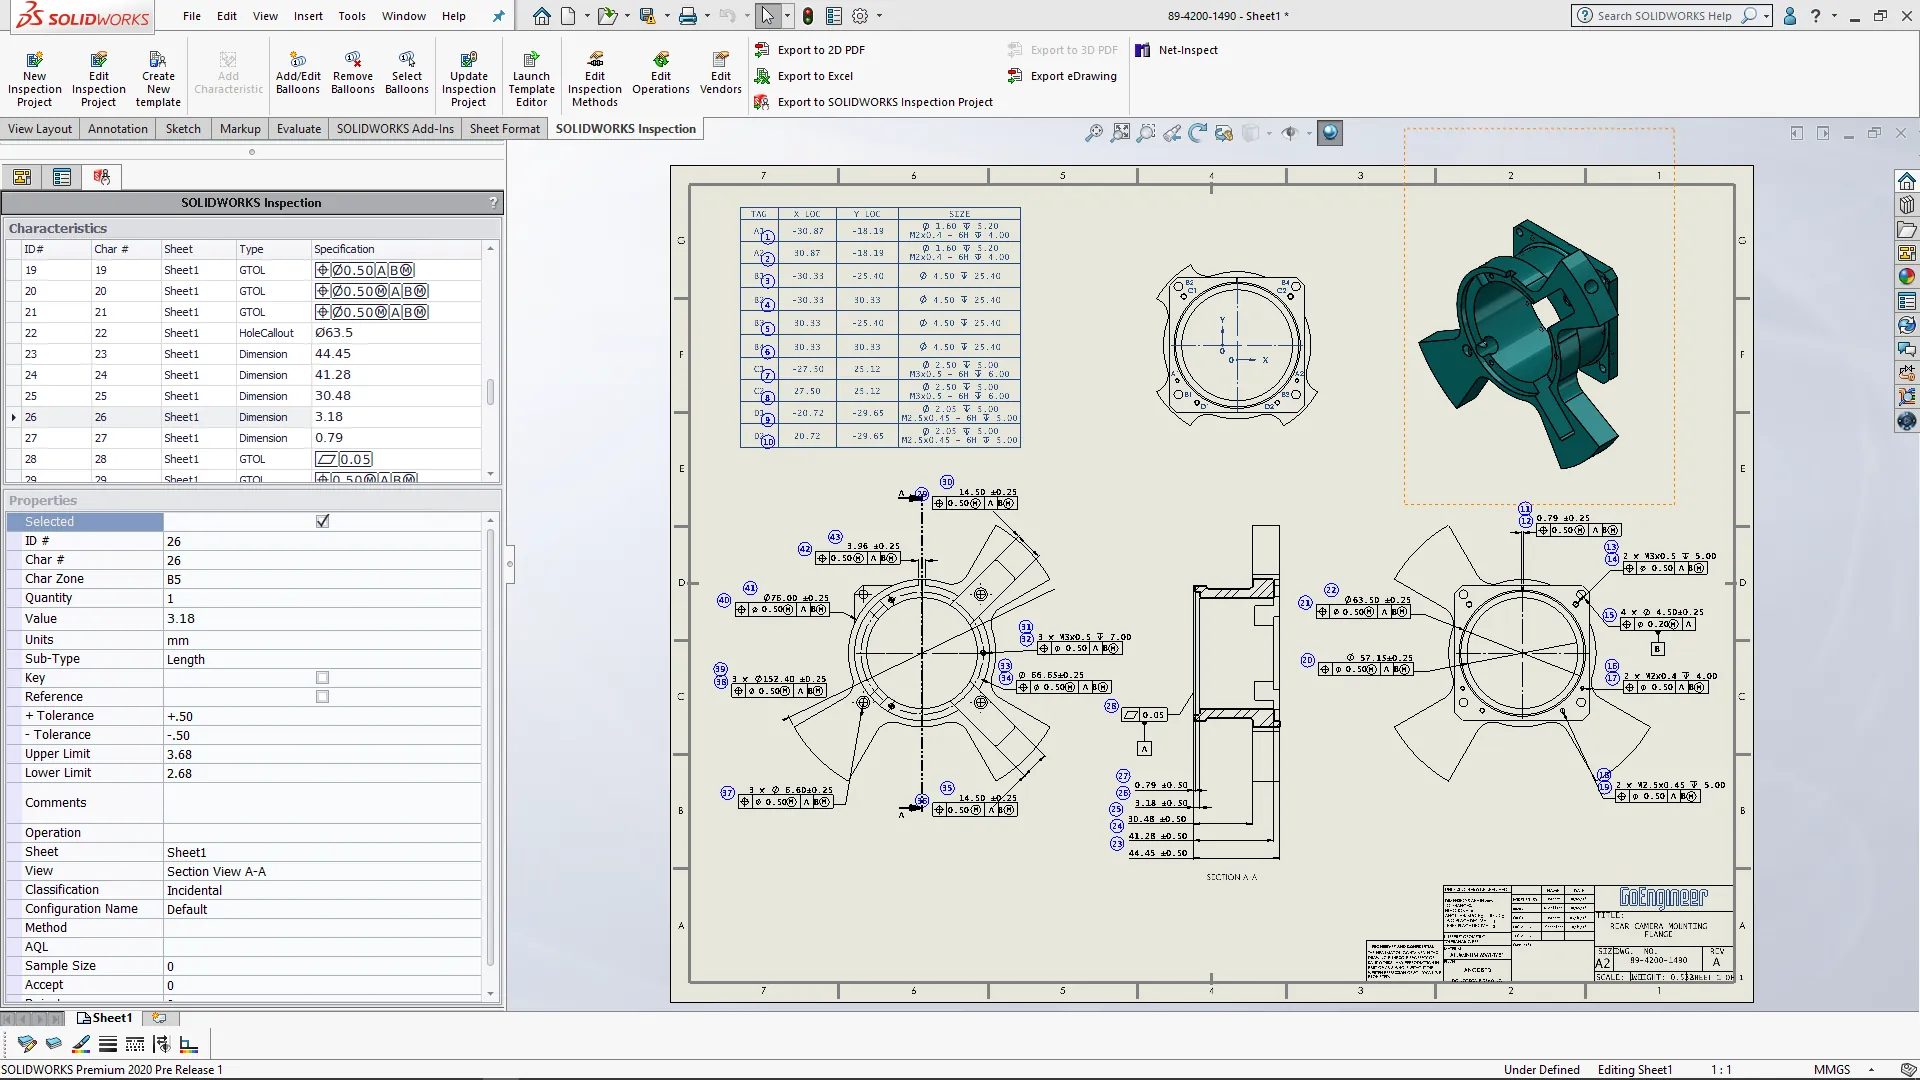 Learn How To Use SOLIDWORKS Inspection to Create Fast & Accurate Quality Documents